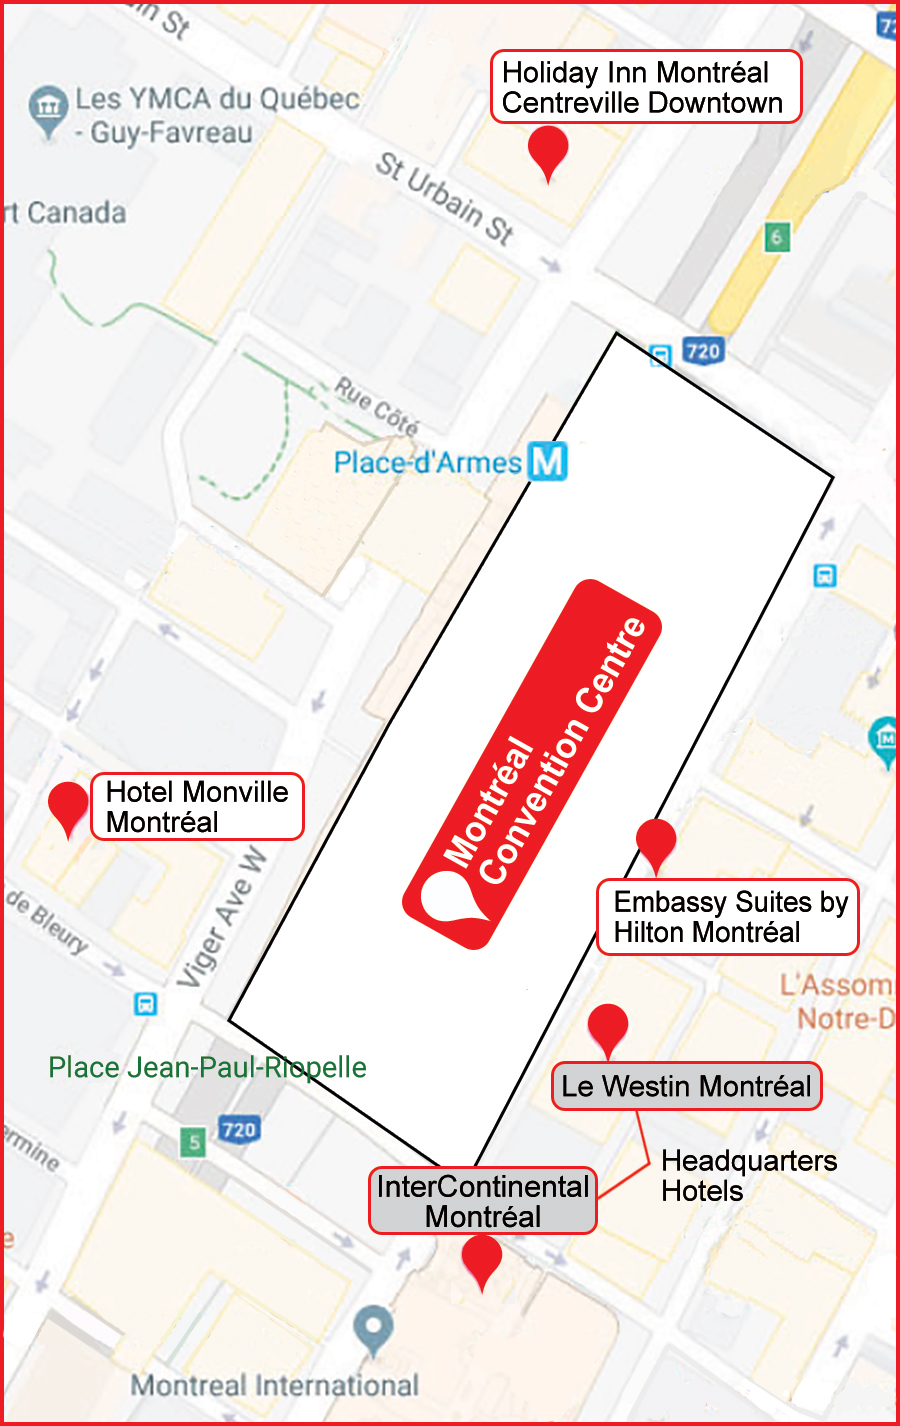 Downtown Montreal Map of Hotels and Convention Center